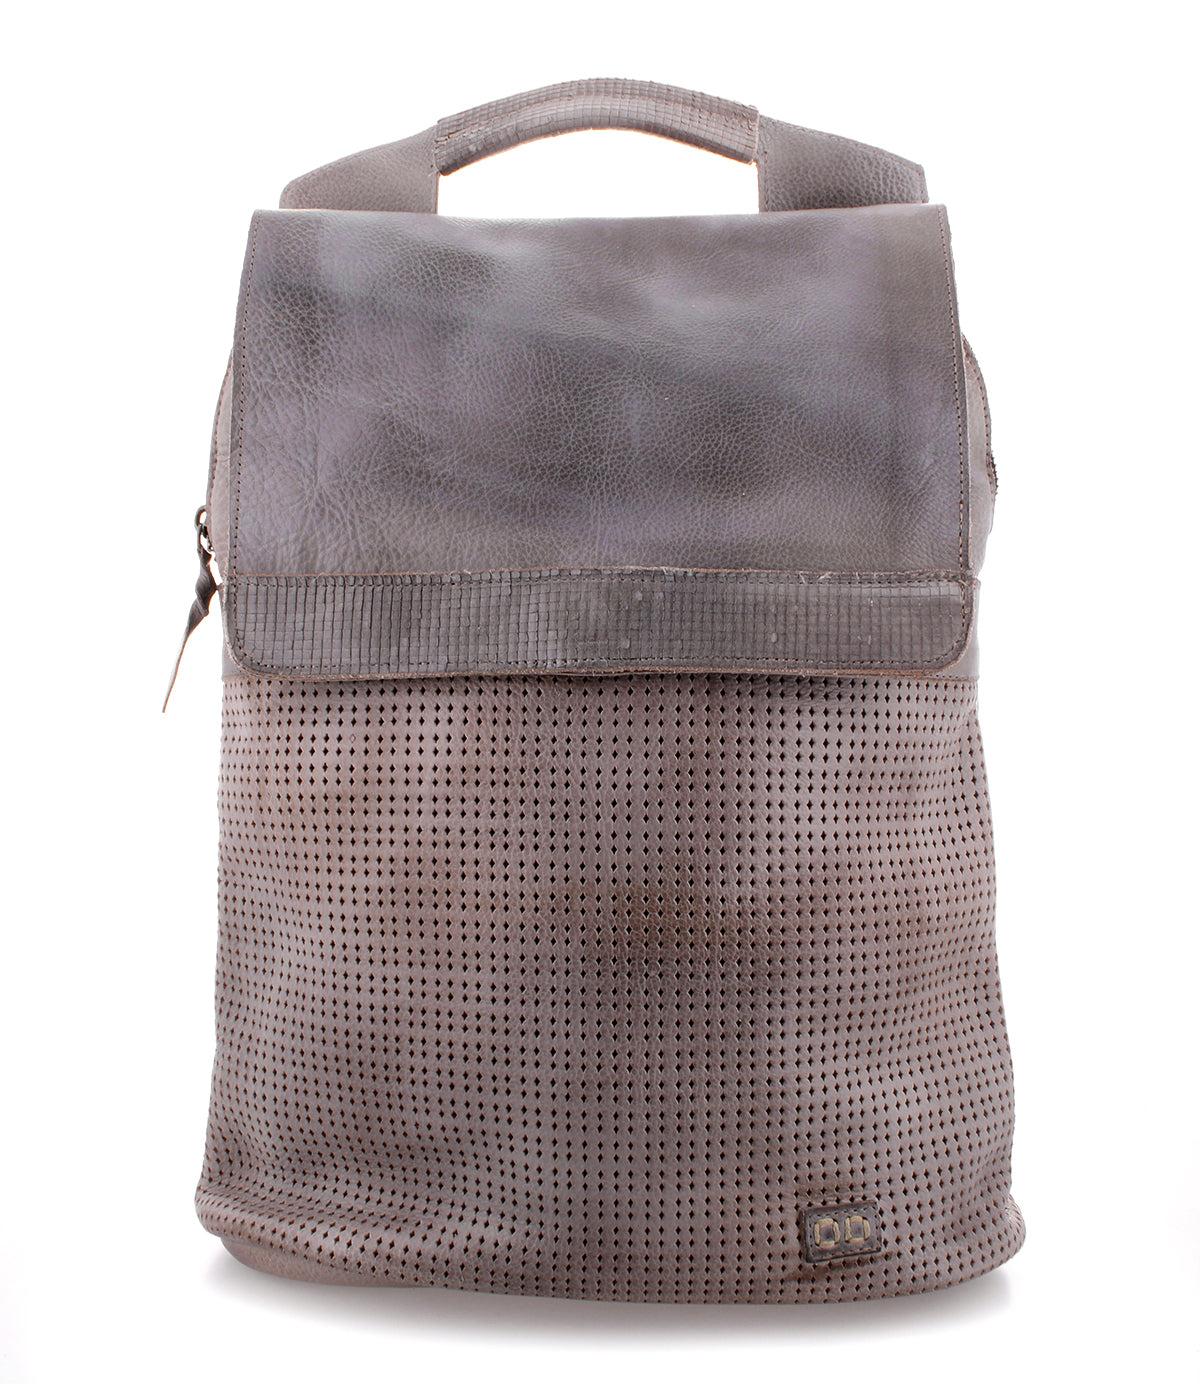 A grey leather Patsy backpack with perforated details. (Brand Name: Bed Stu)